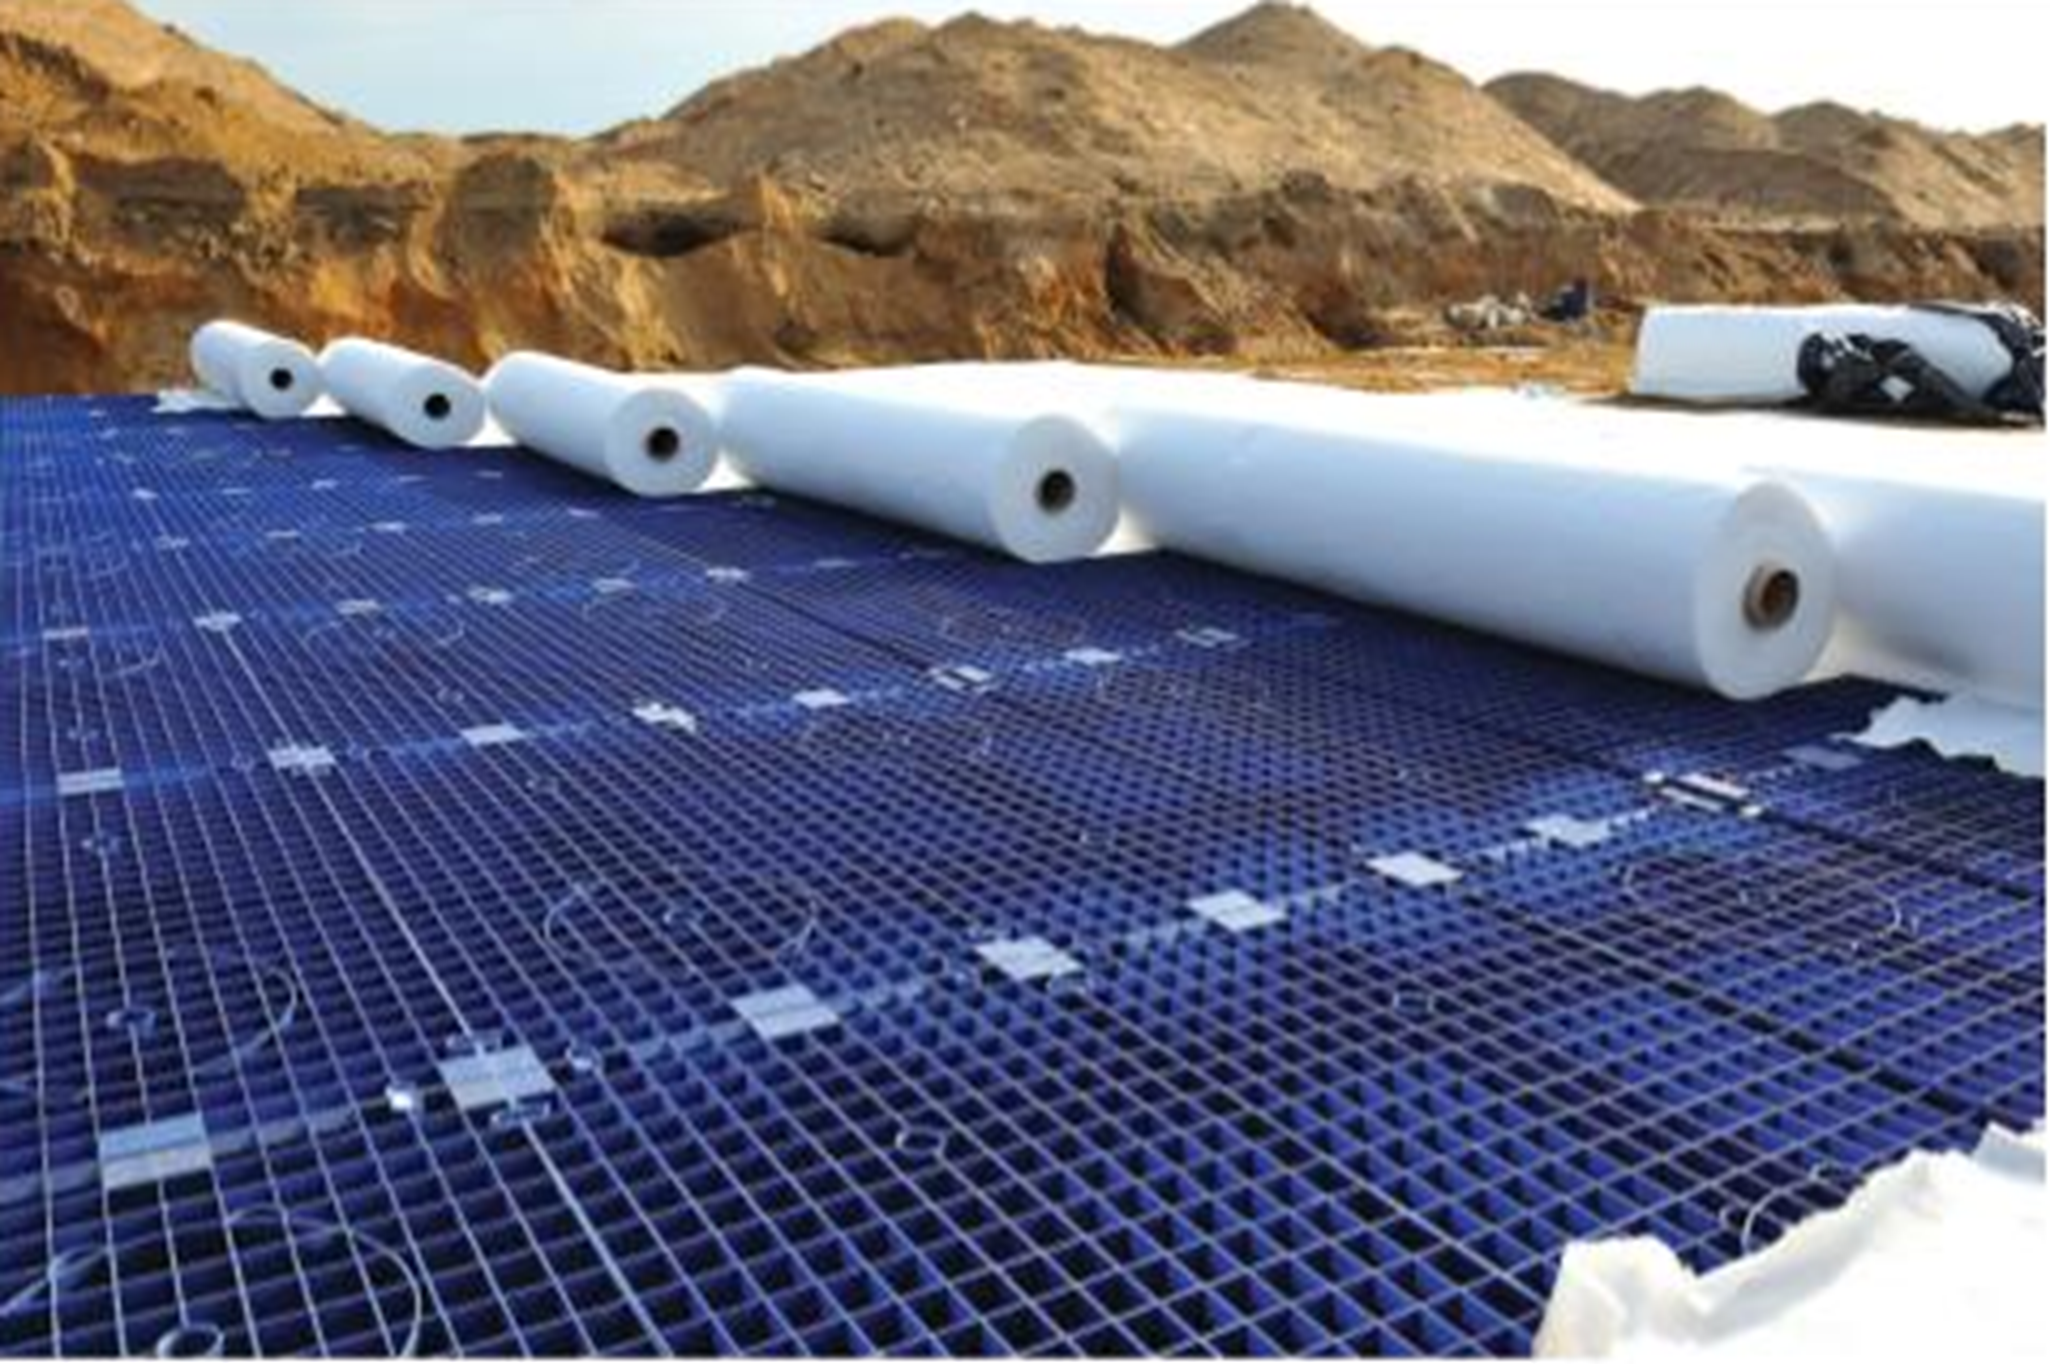 Wavin’s Q-Bic infiltration and attenuation systems stand the test of time